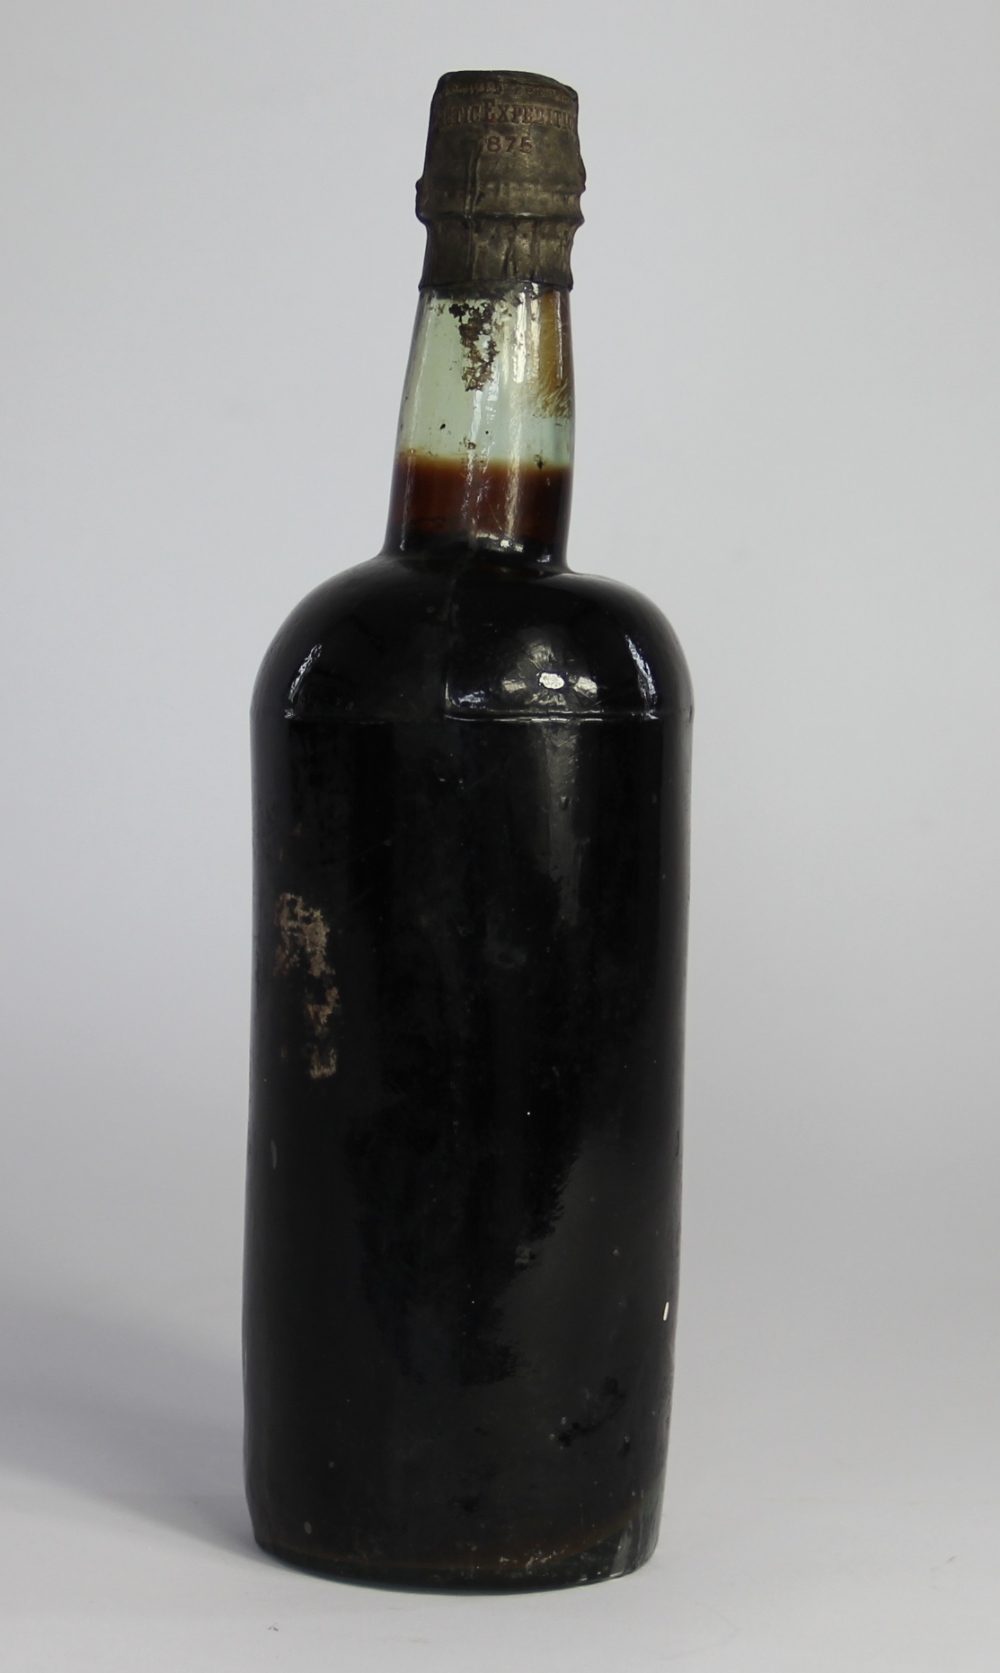 An unopened bottle of Arctic Expedition beer dated 1875, with original intact label and contents.